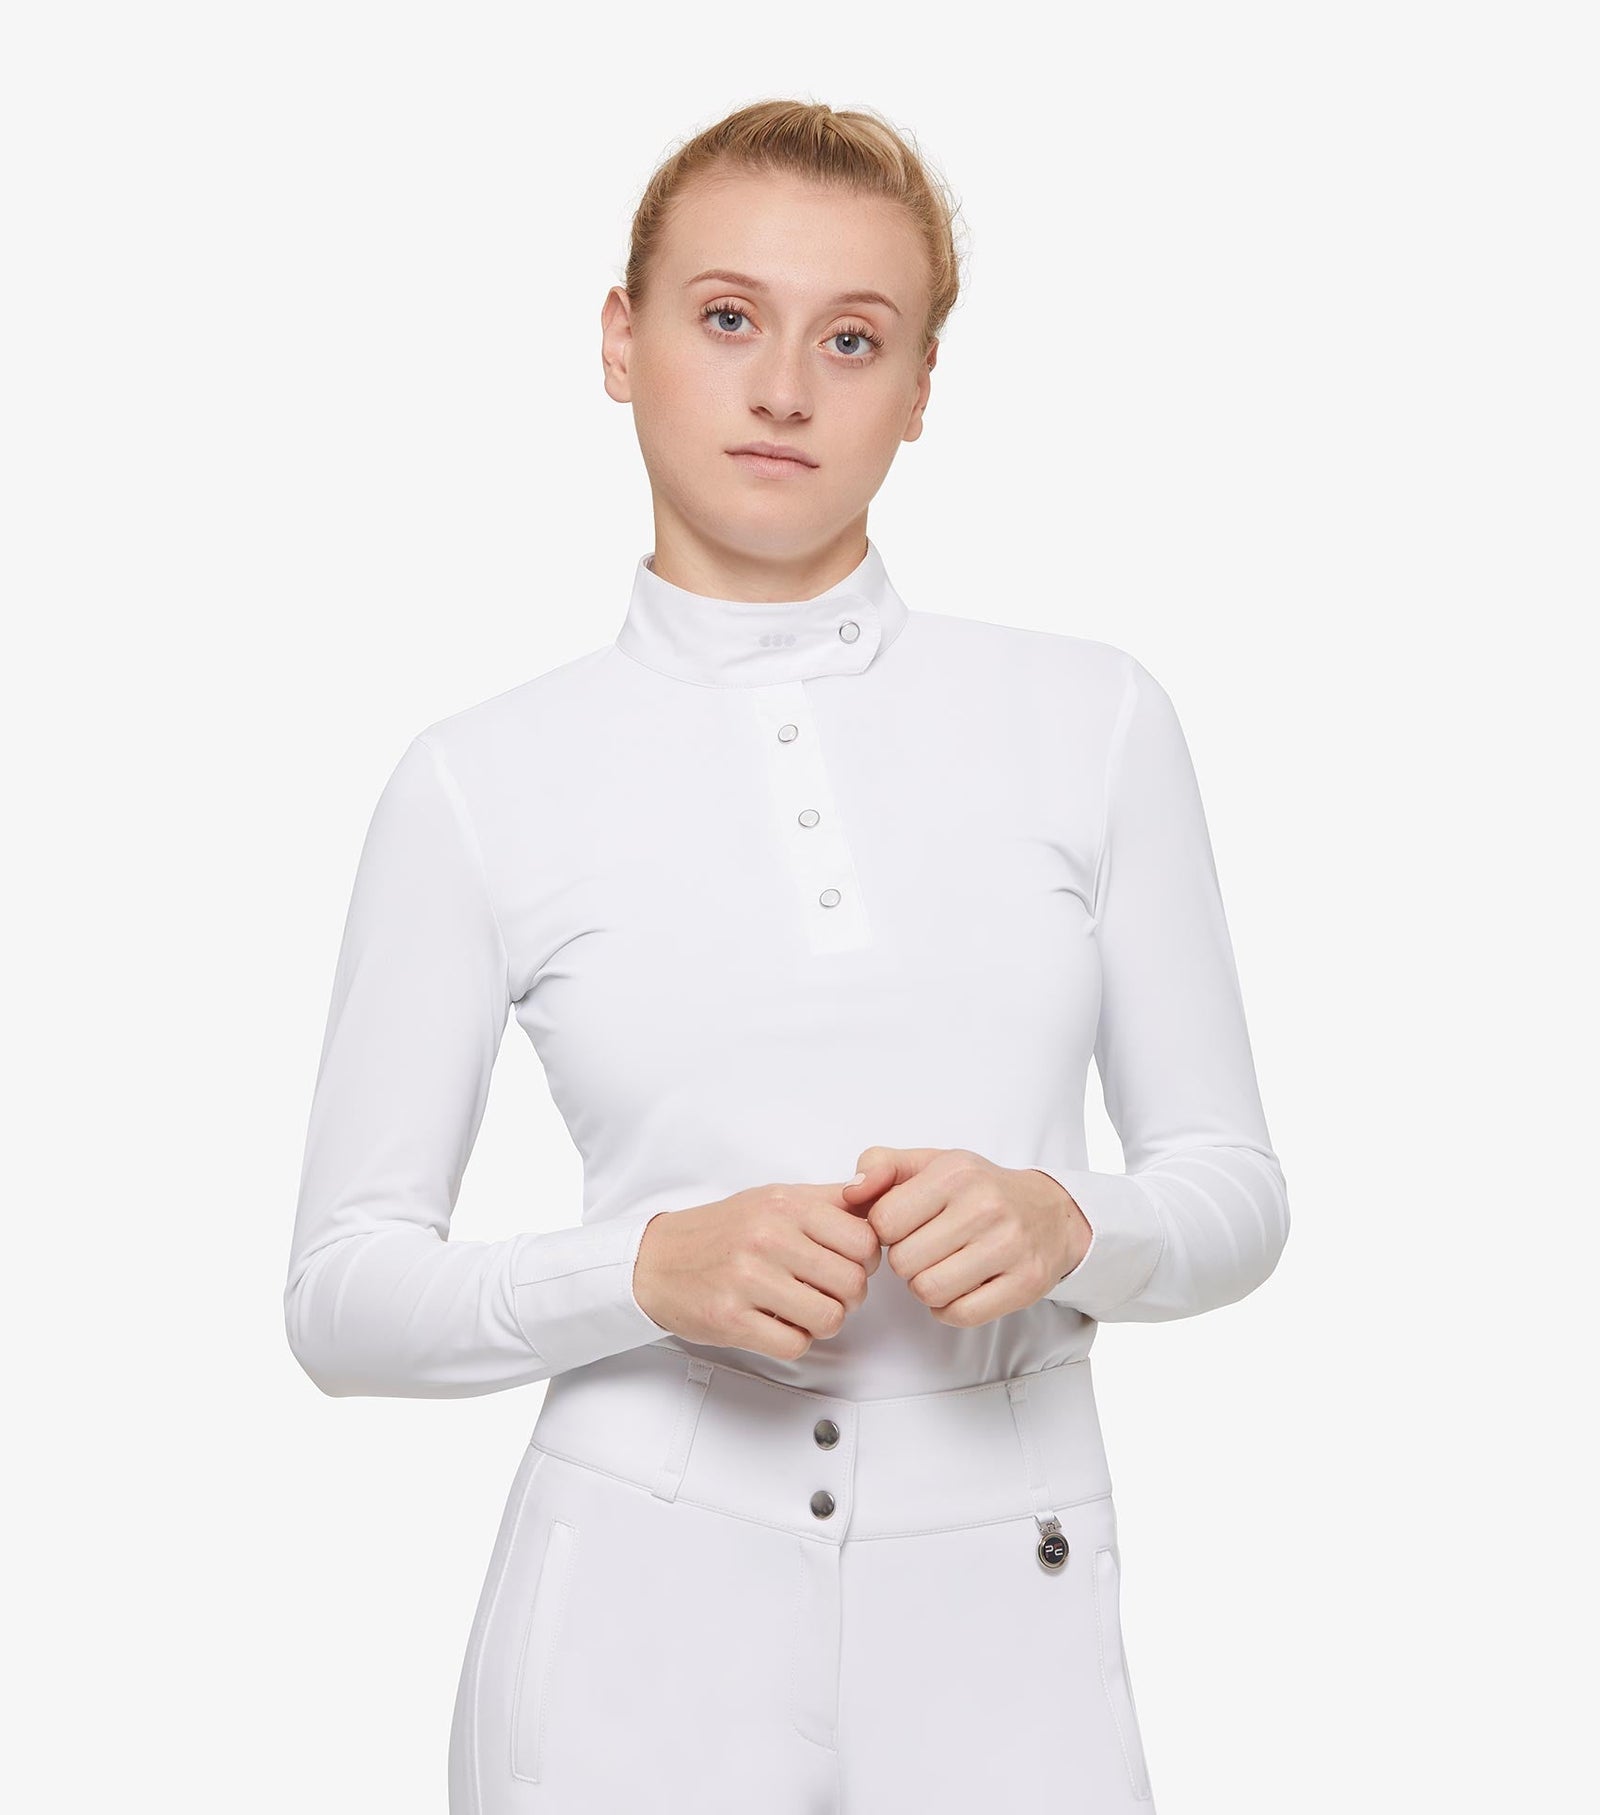 Rossini Ladies Competition Long Sleeve Lycra Shirt